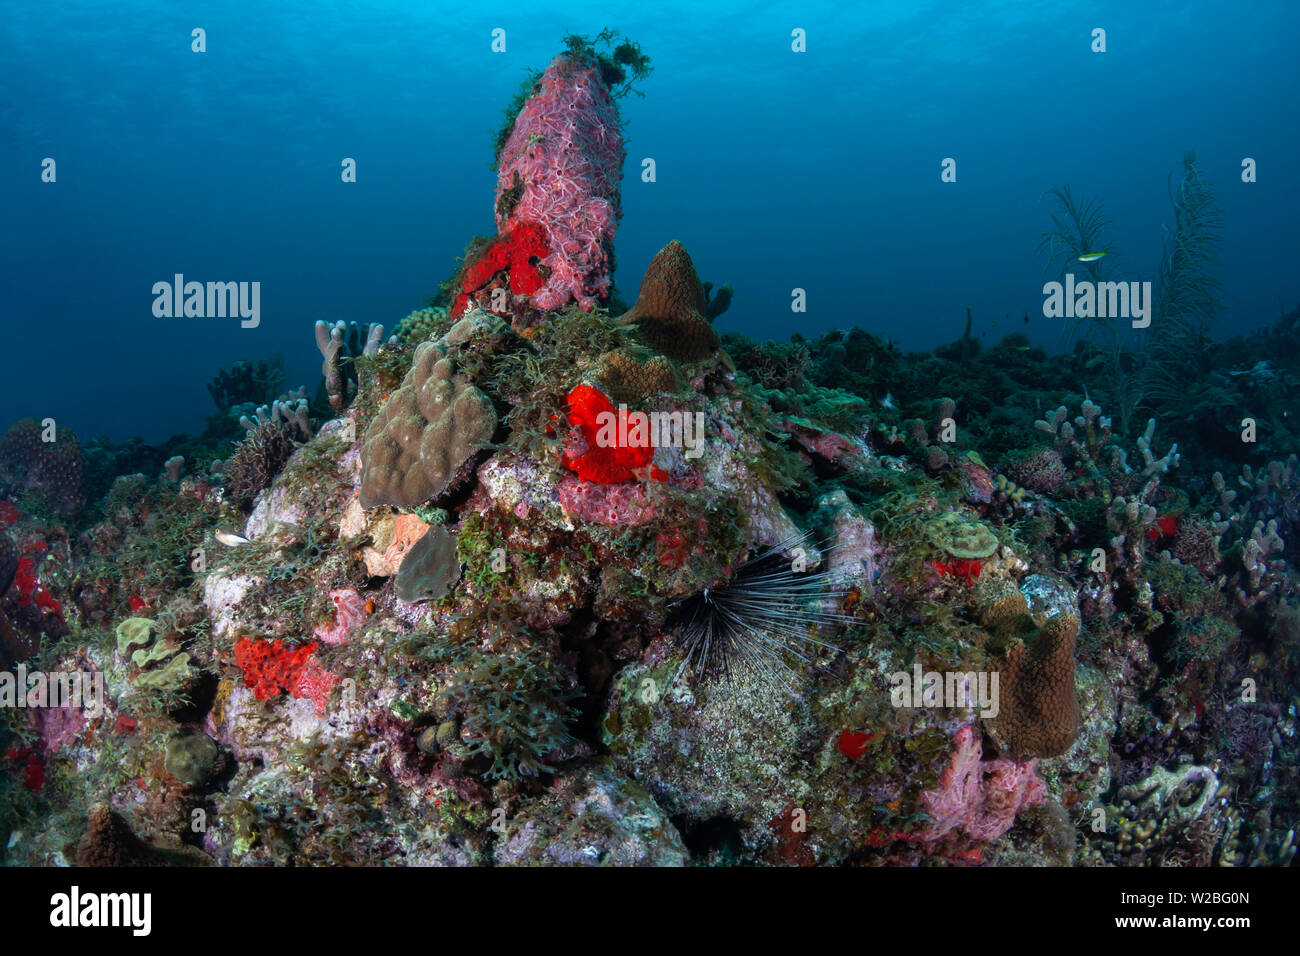 A lone Long-Spined Urchin has found the safety of a crevice in the beautiful coral reefs and blue waters of the Caribbean off the island of Grenada. Stock Photo